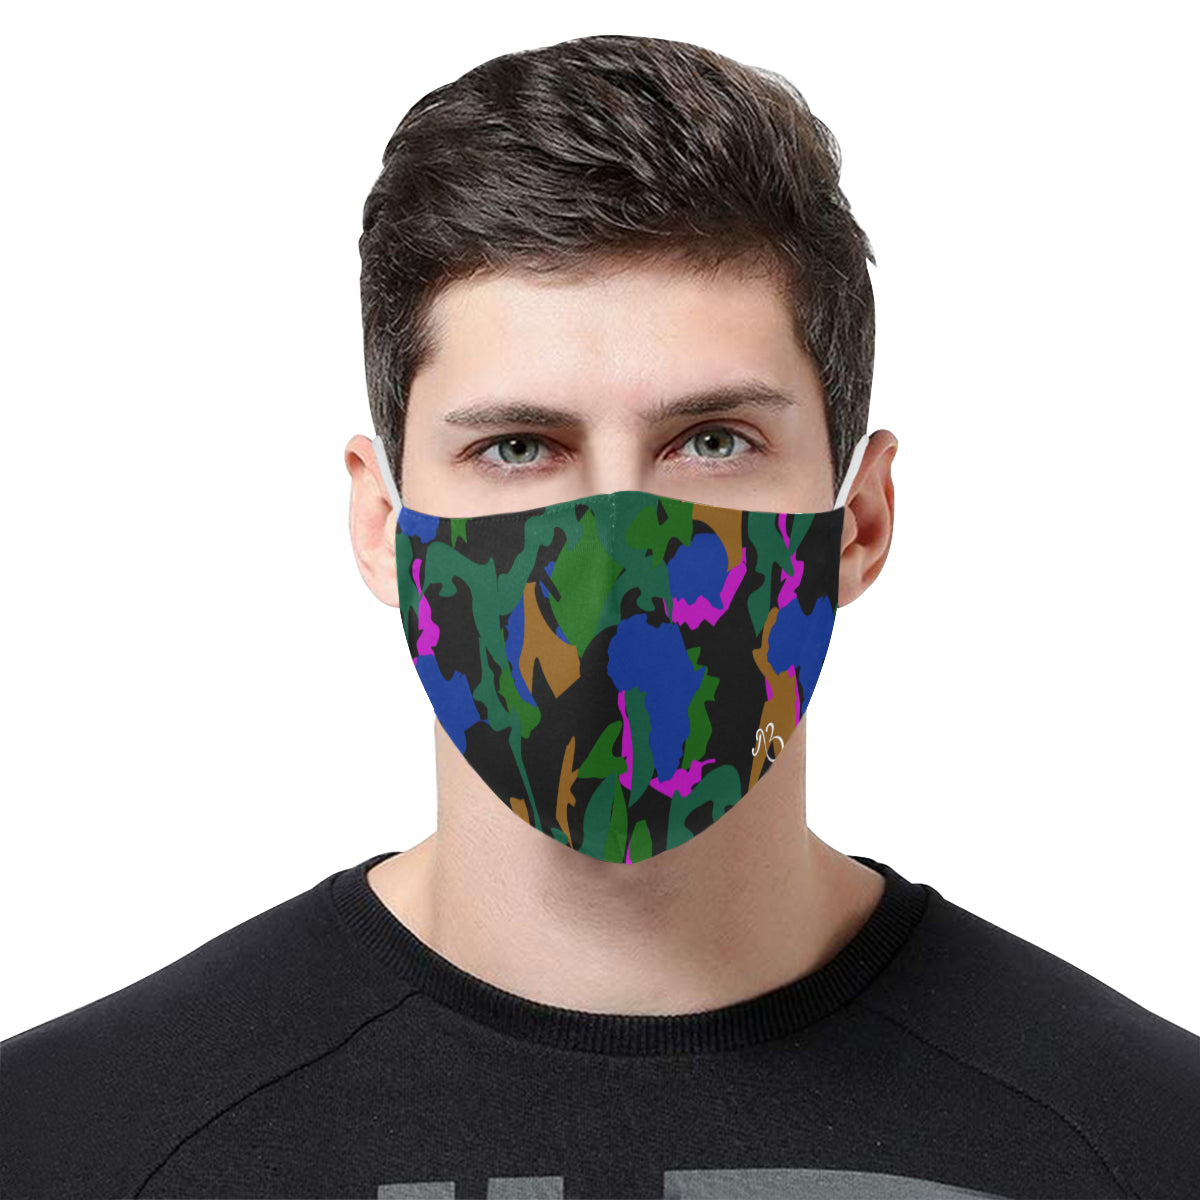 AfriBix Camo Print Cotton Fabric Face Mask with Filter Slot & Adjustable Strap - Non-medical use (2 Filters Included)